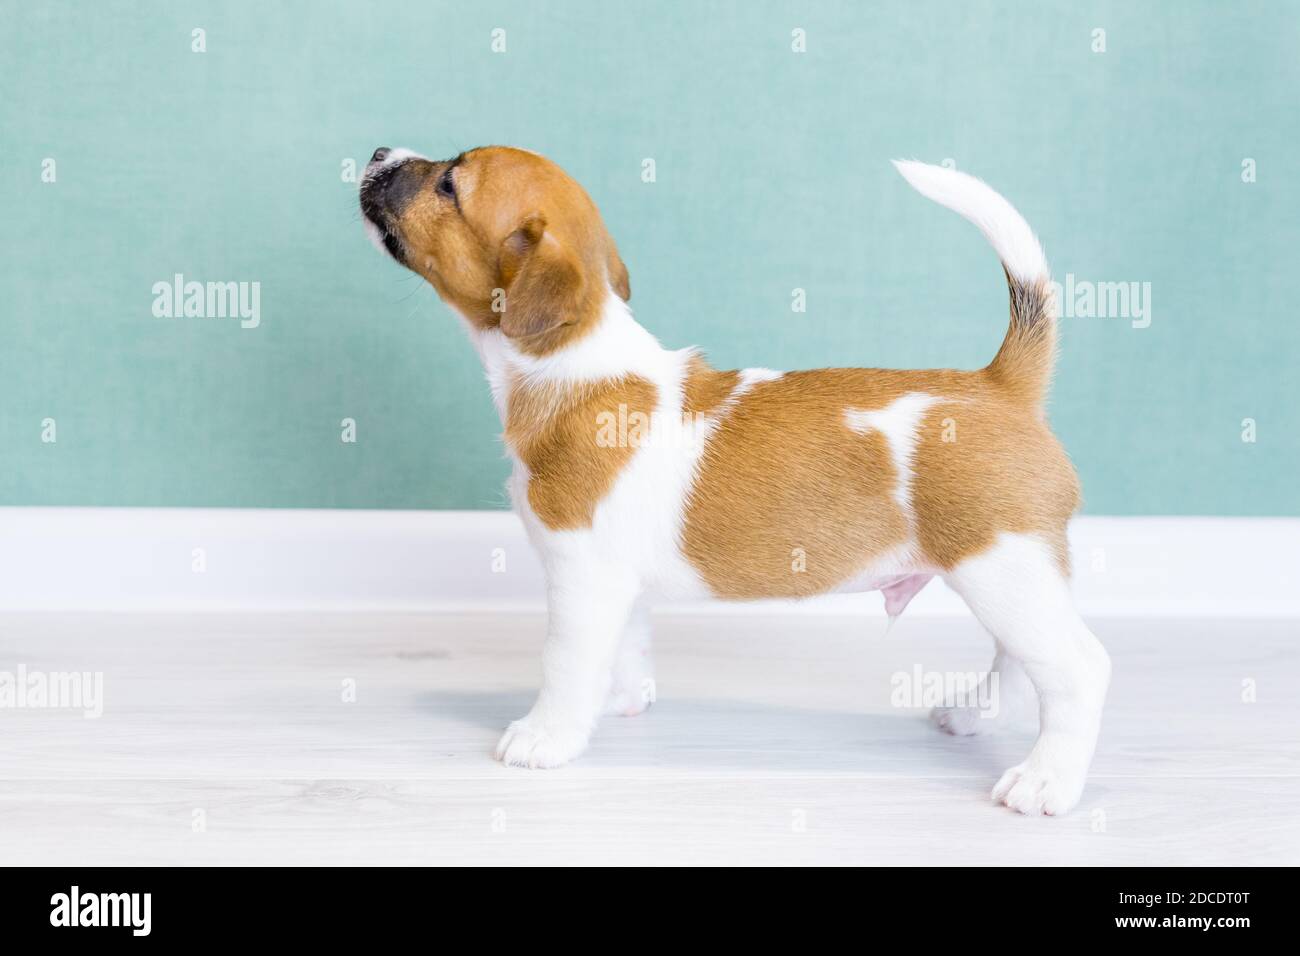 A beautiful white puppy Jack Russell Terrier with brown ears and spots and a black nose, stands sideways in a rack, looks up. Stock Photo